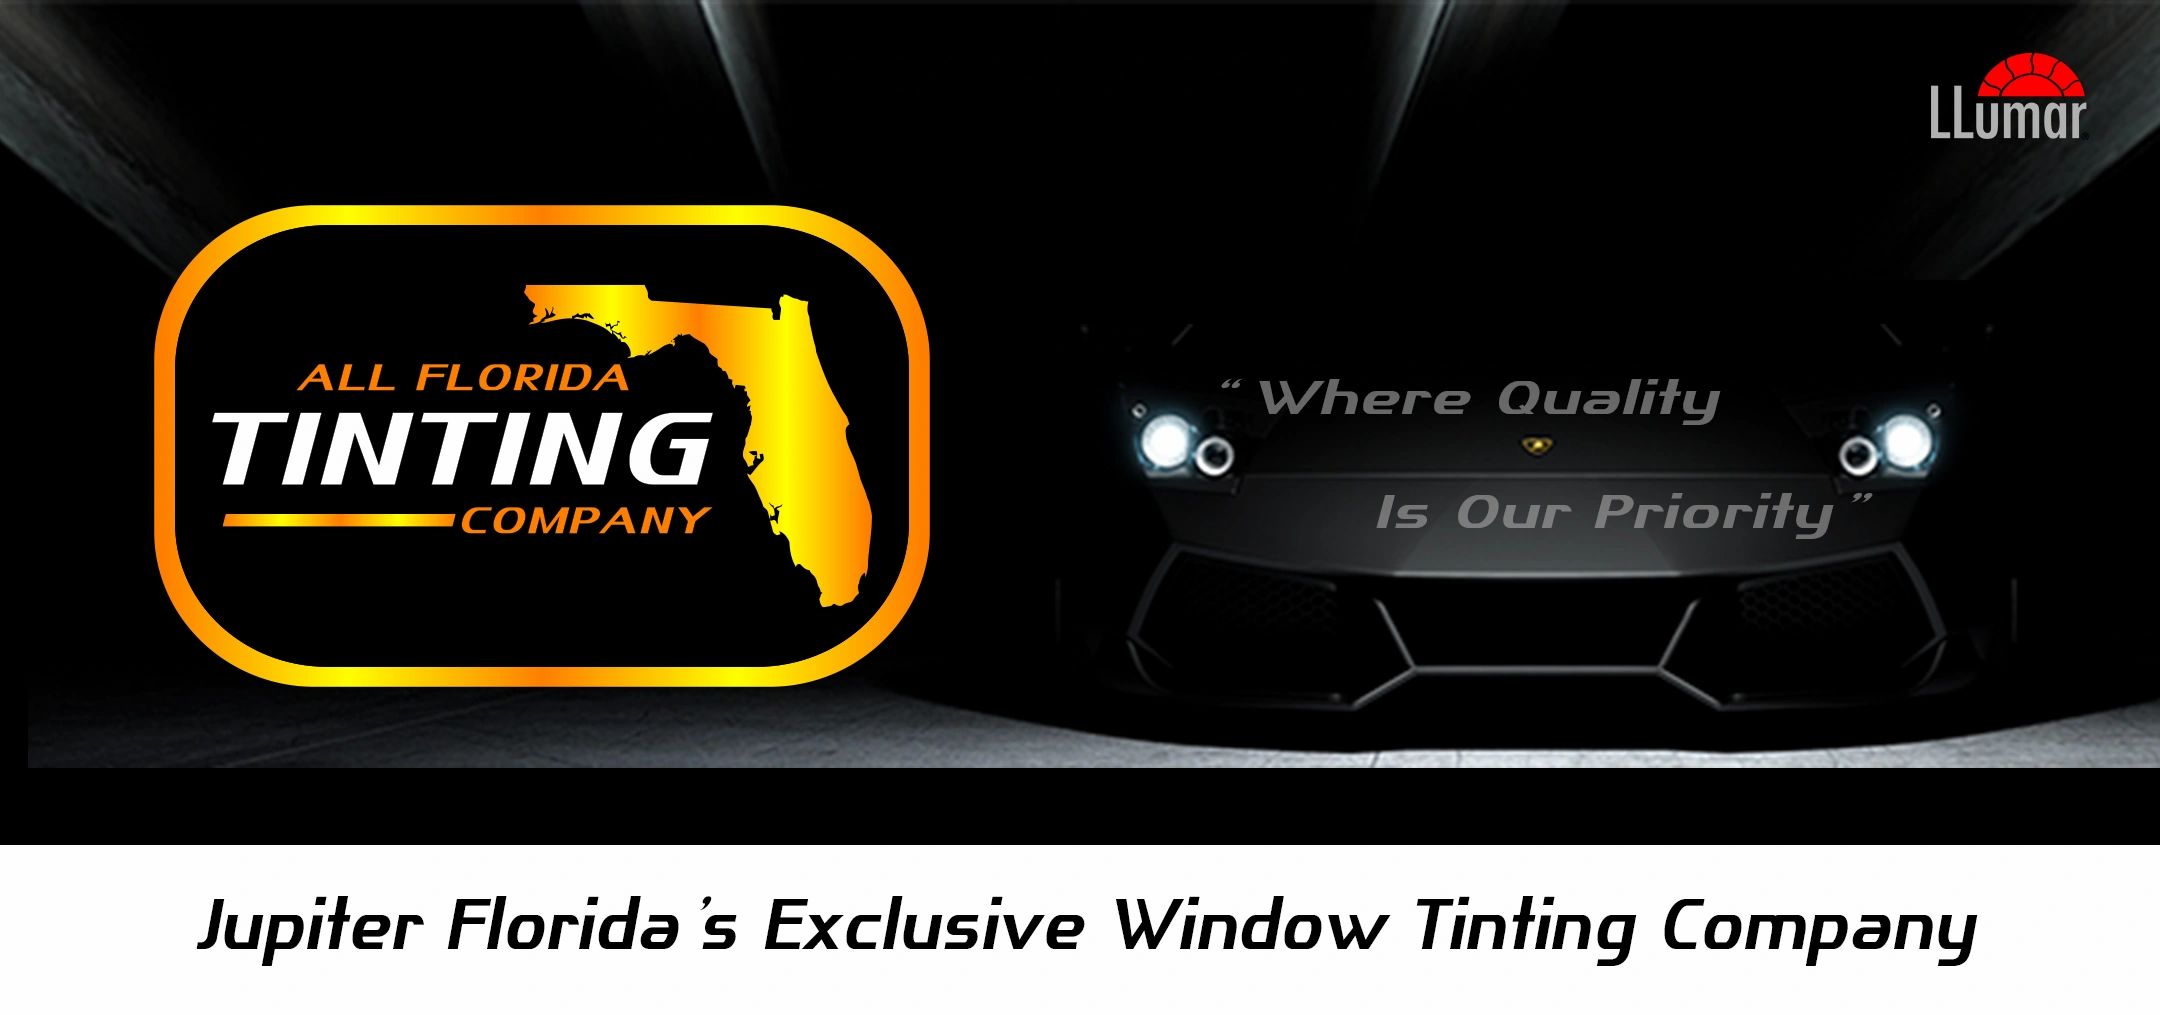 All Florida Tinting Co. United States Tint Laws